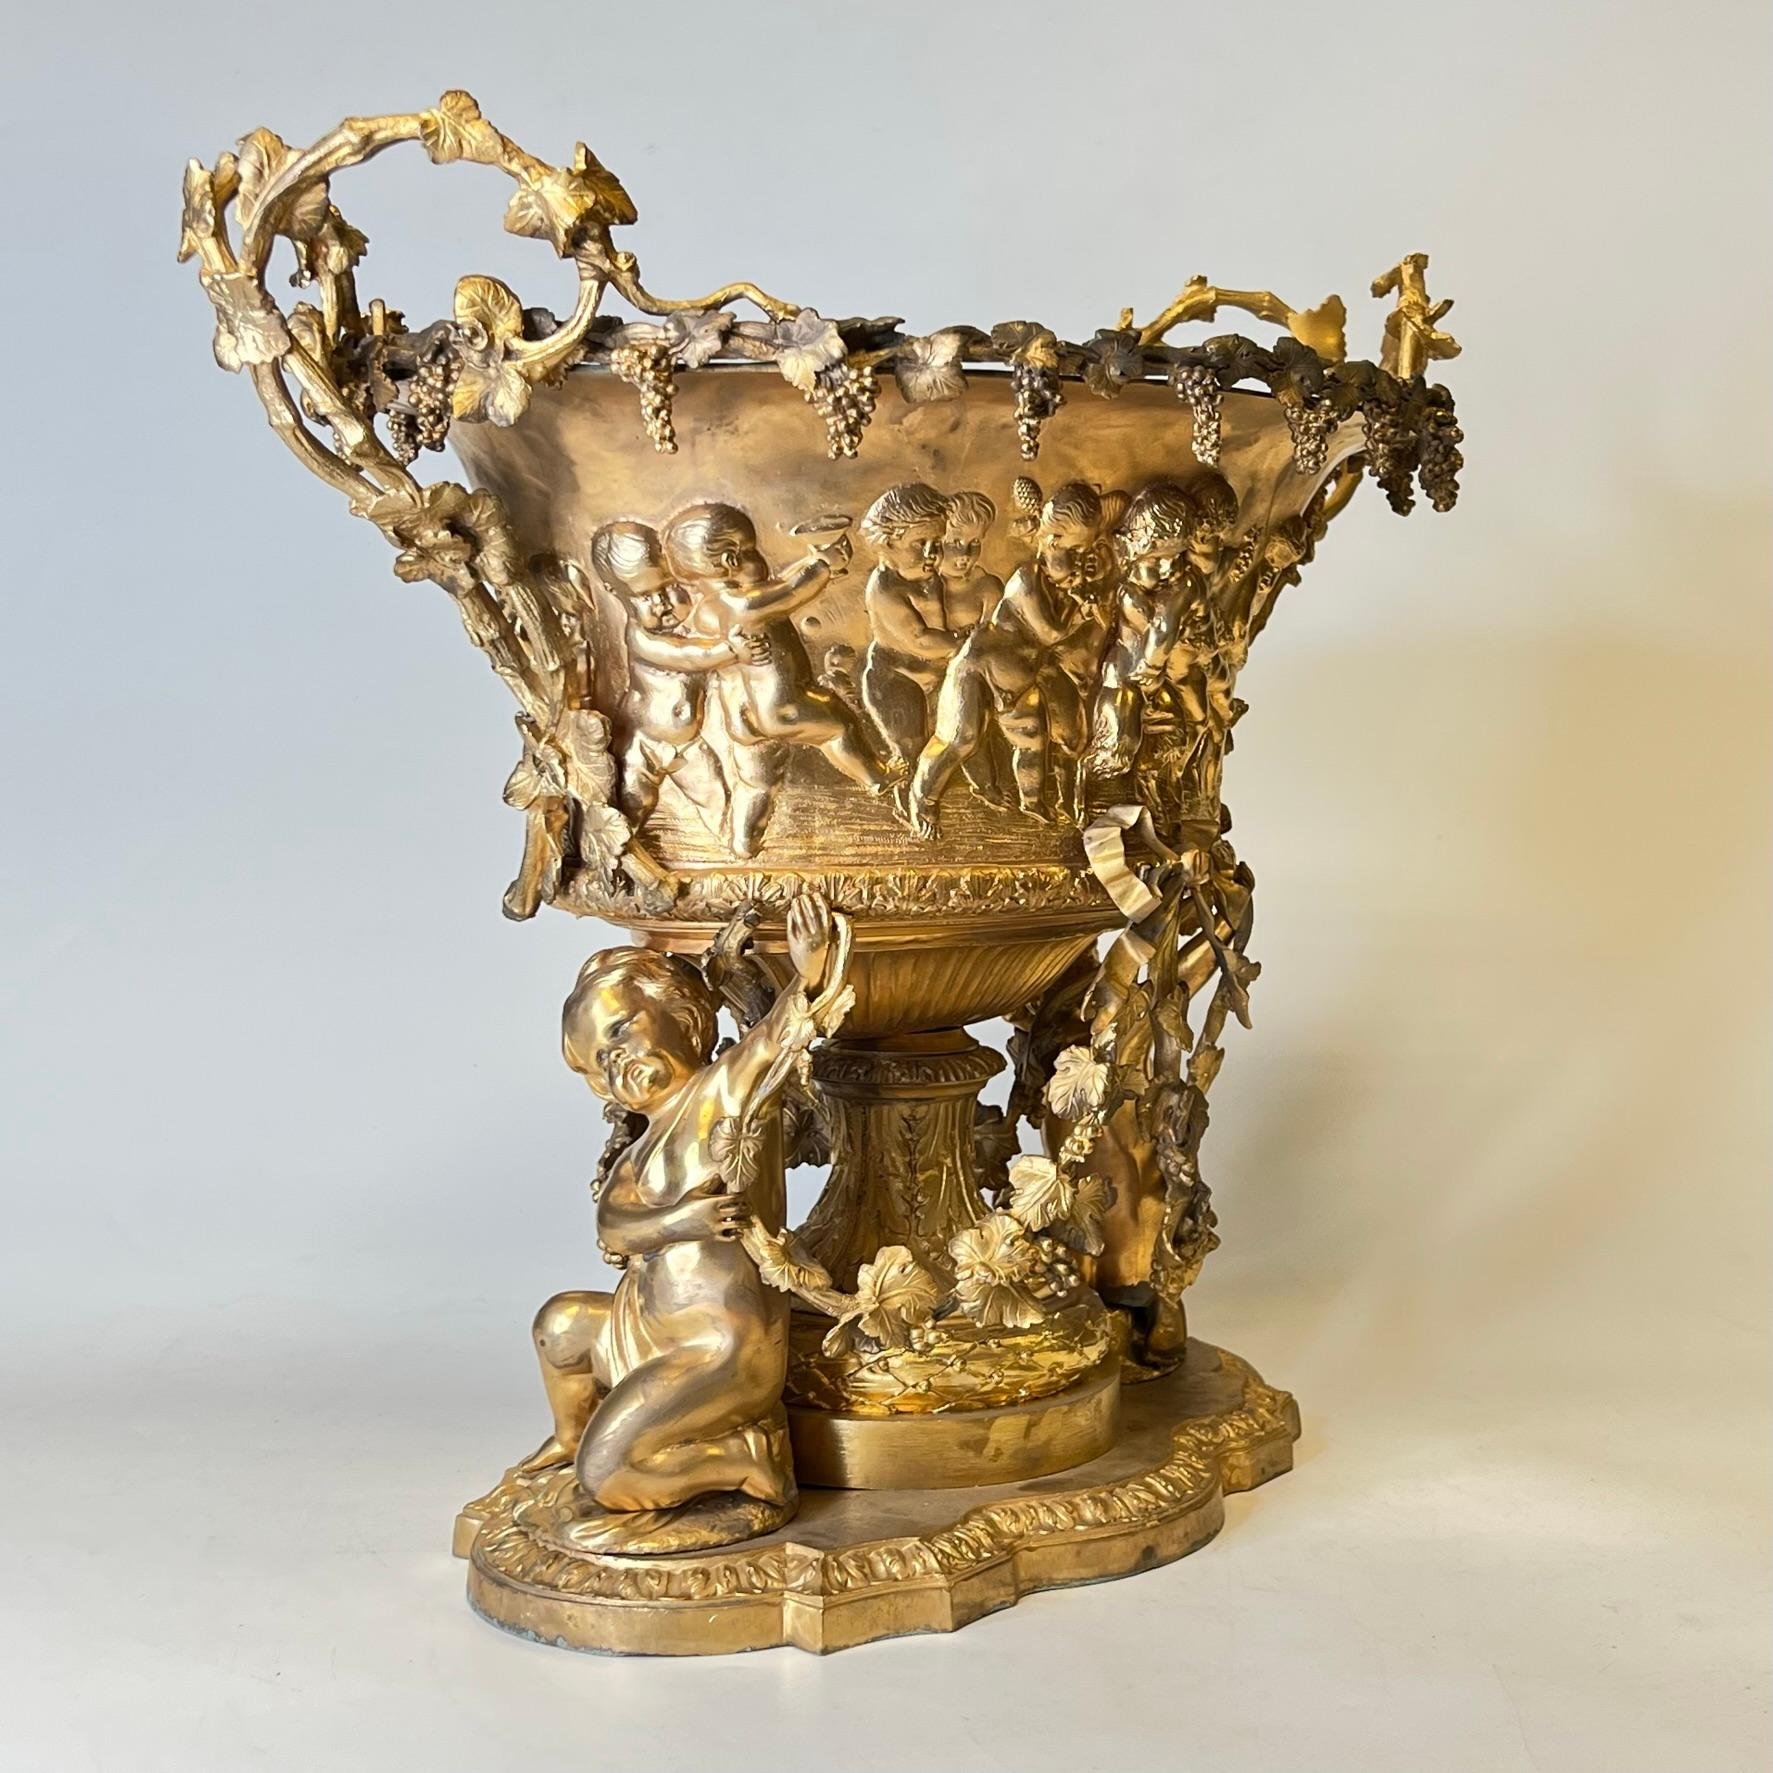 20th Century Neoclassical Gilt Bronze Jardiniere with Bacchanal Motif in Louis XVI Style